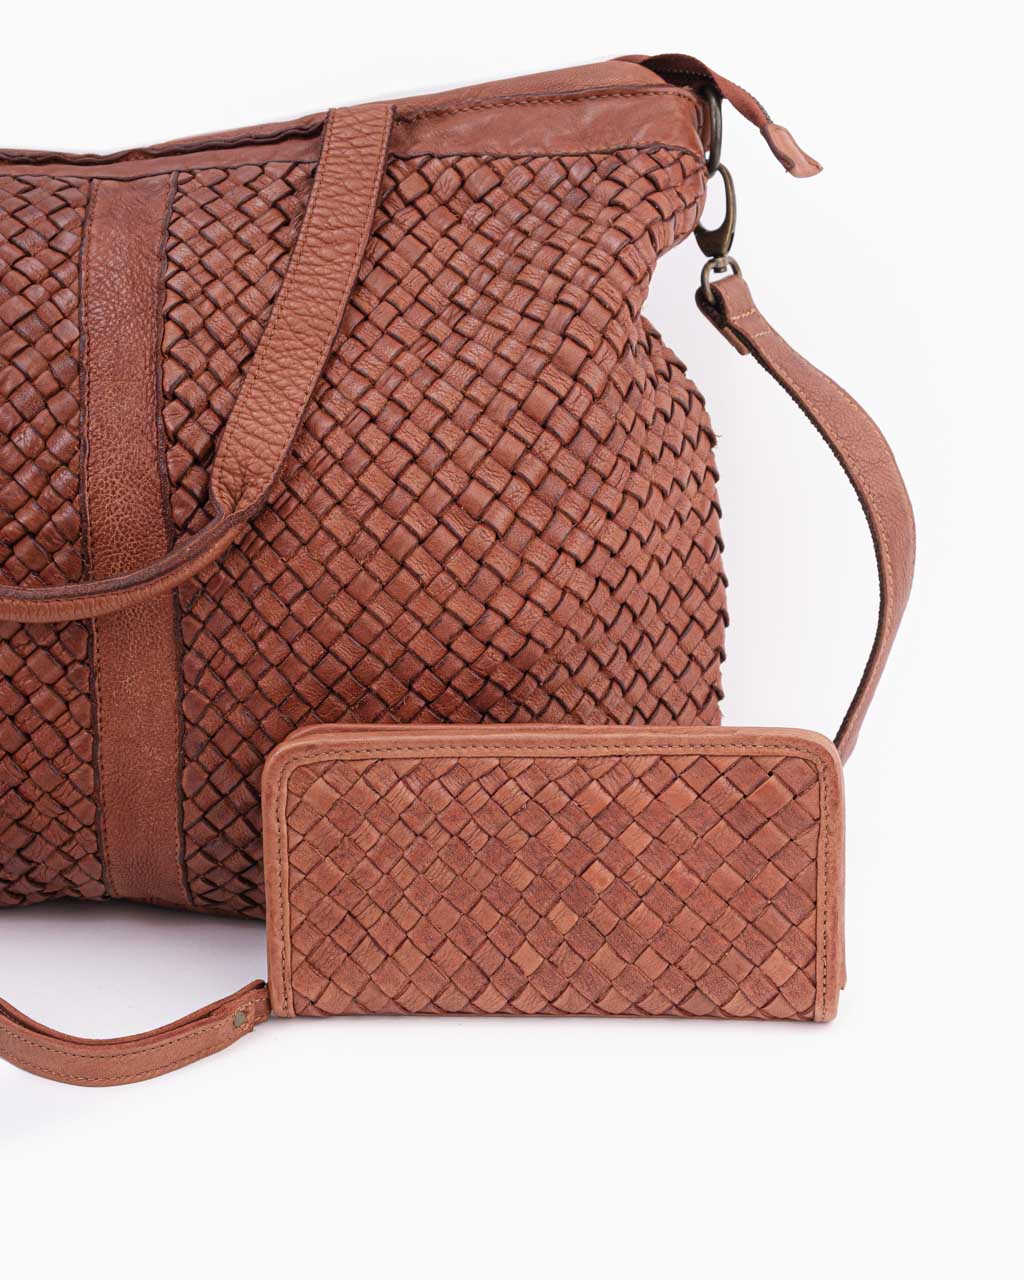 Discover How Artisans Make These Amazing Genuine Woven Leather Bags! –  Trades of Hope